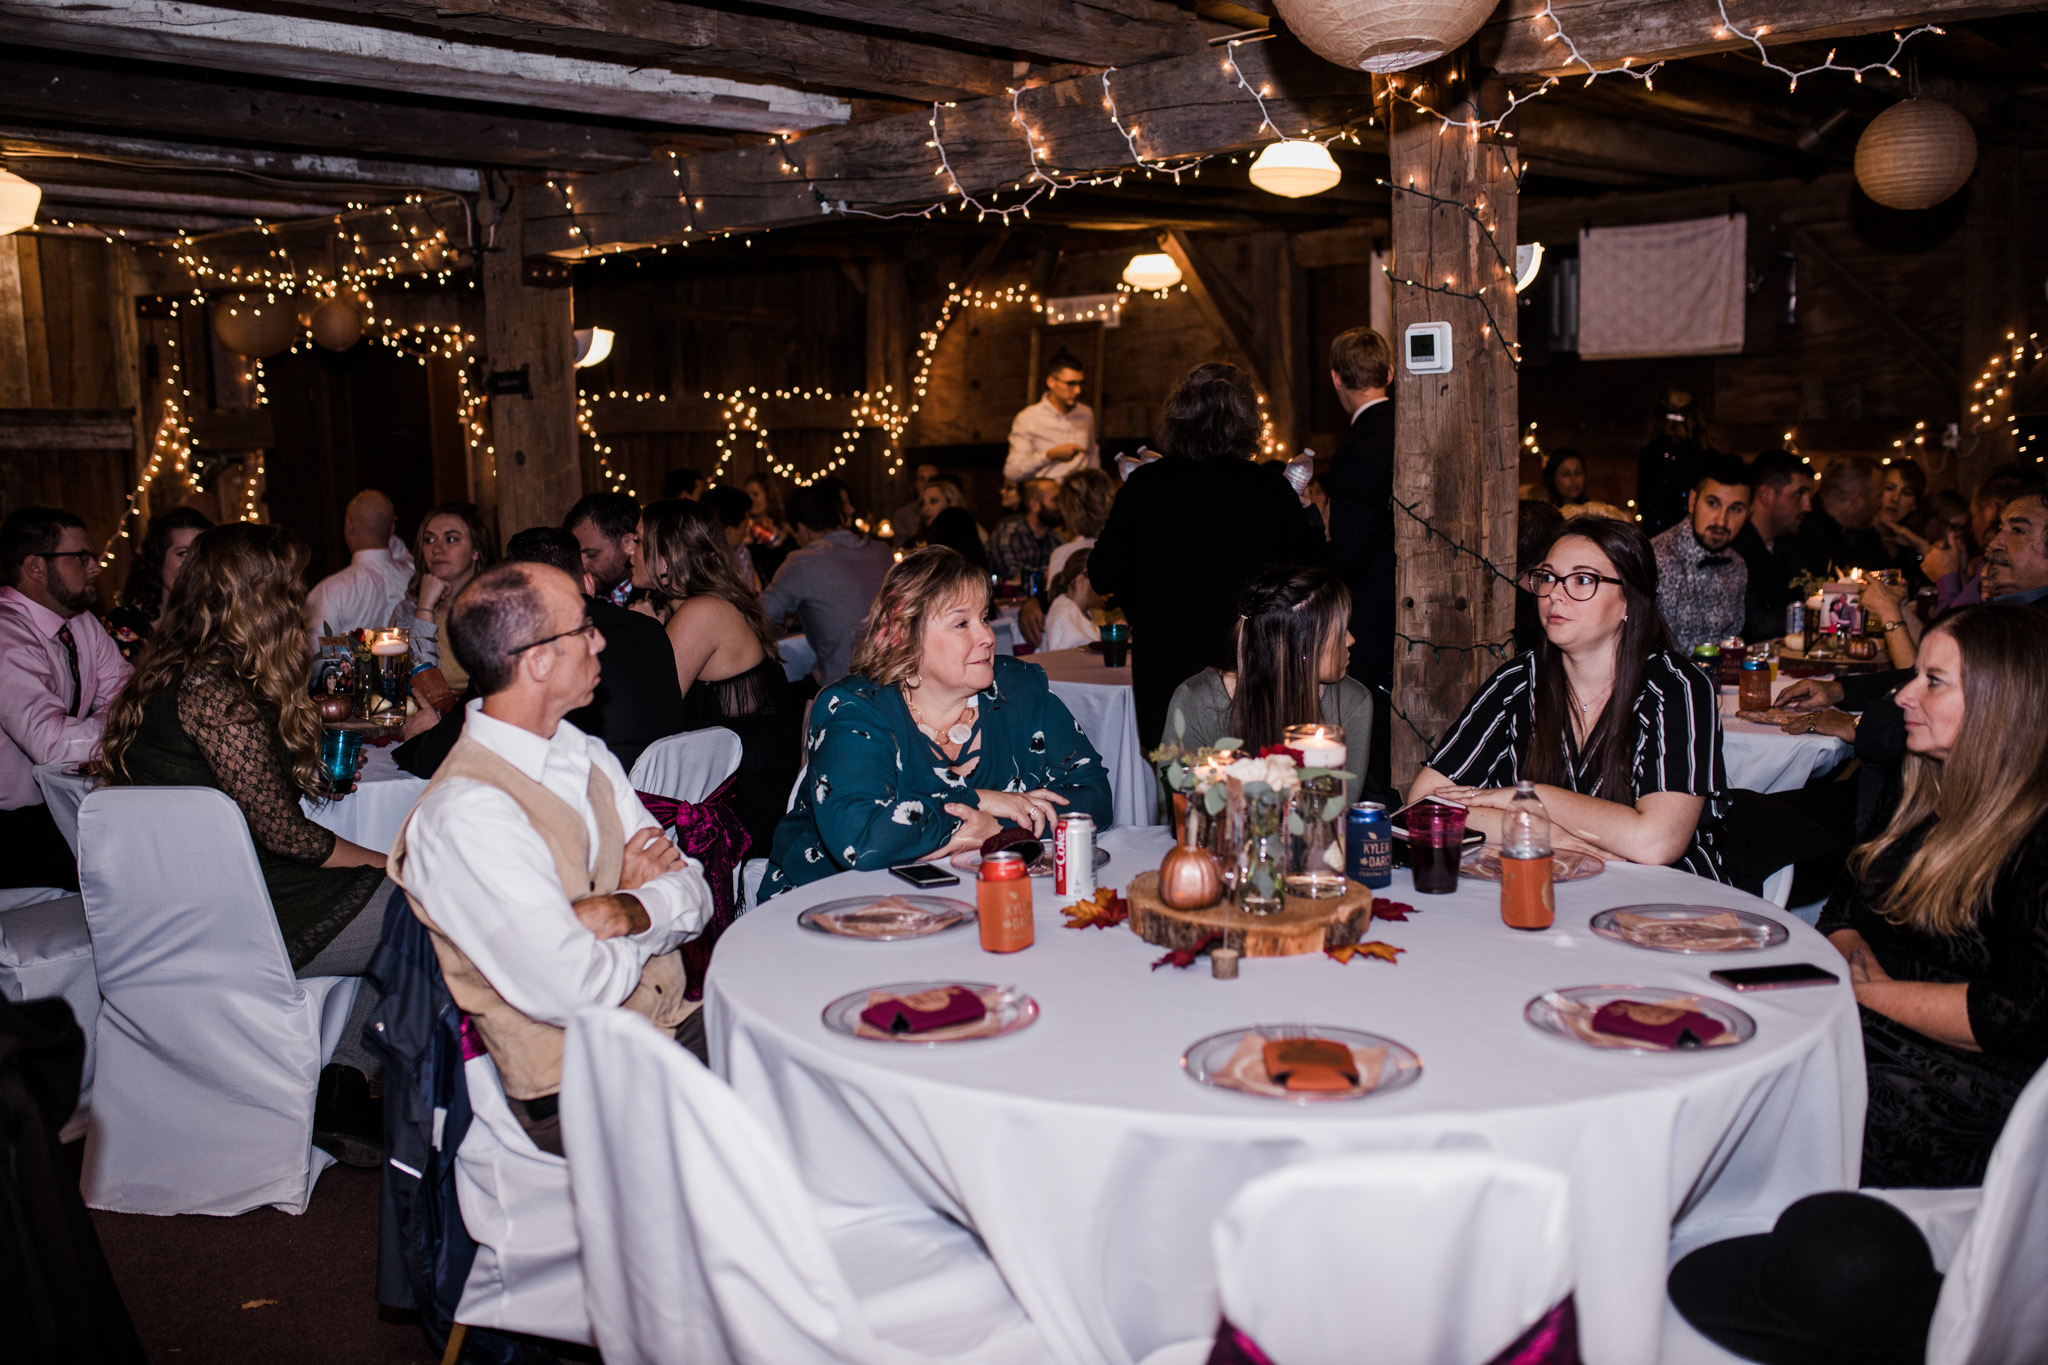 Guests at the reception during this fall ranch wedding.